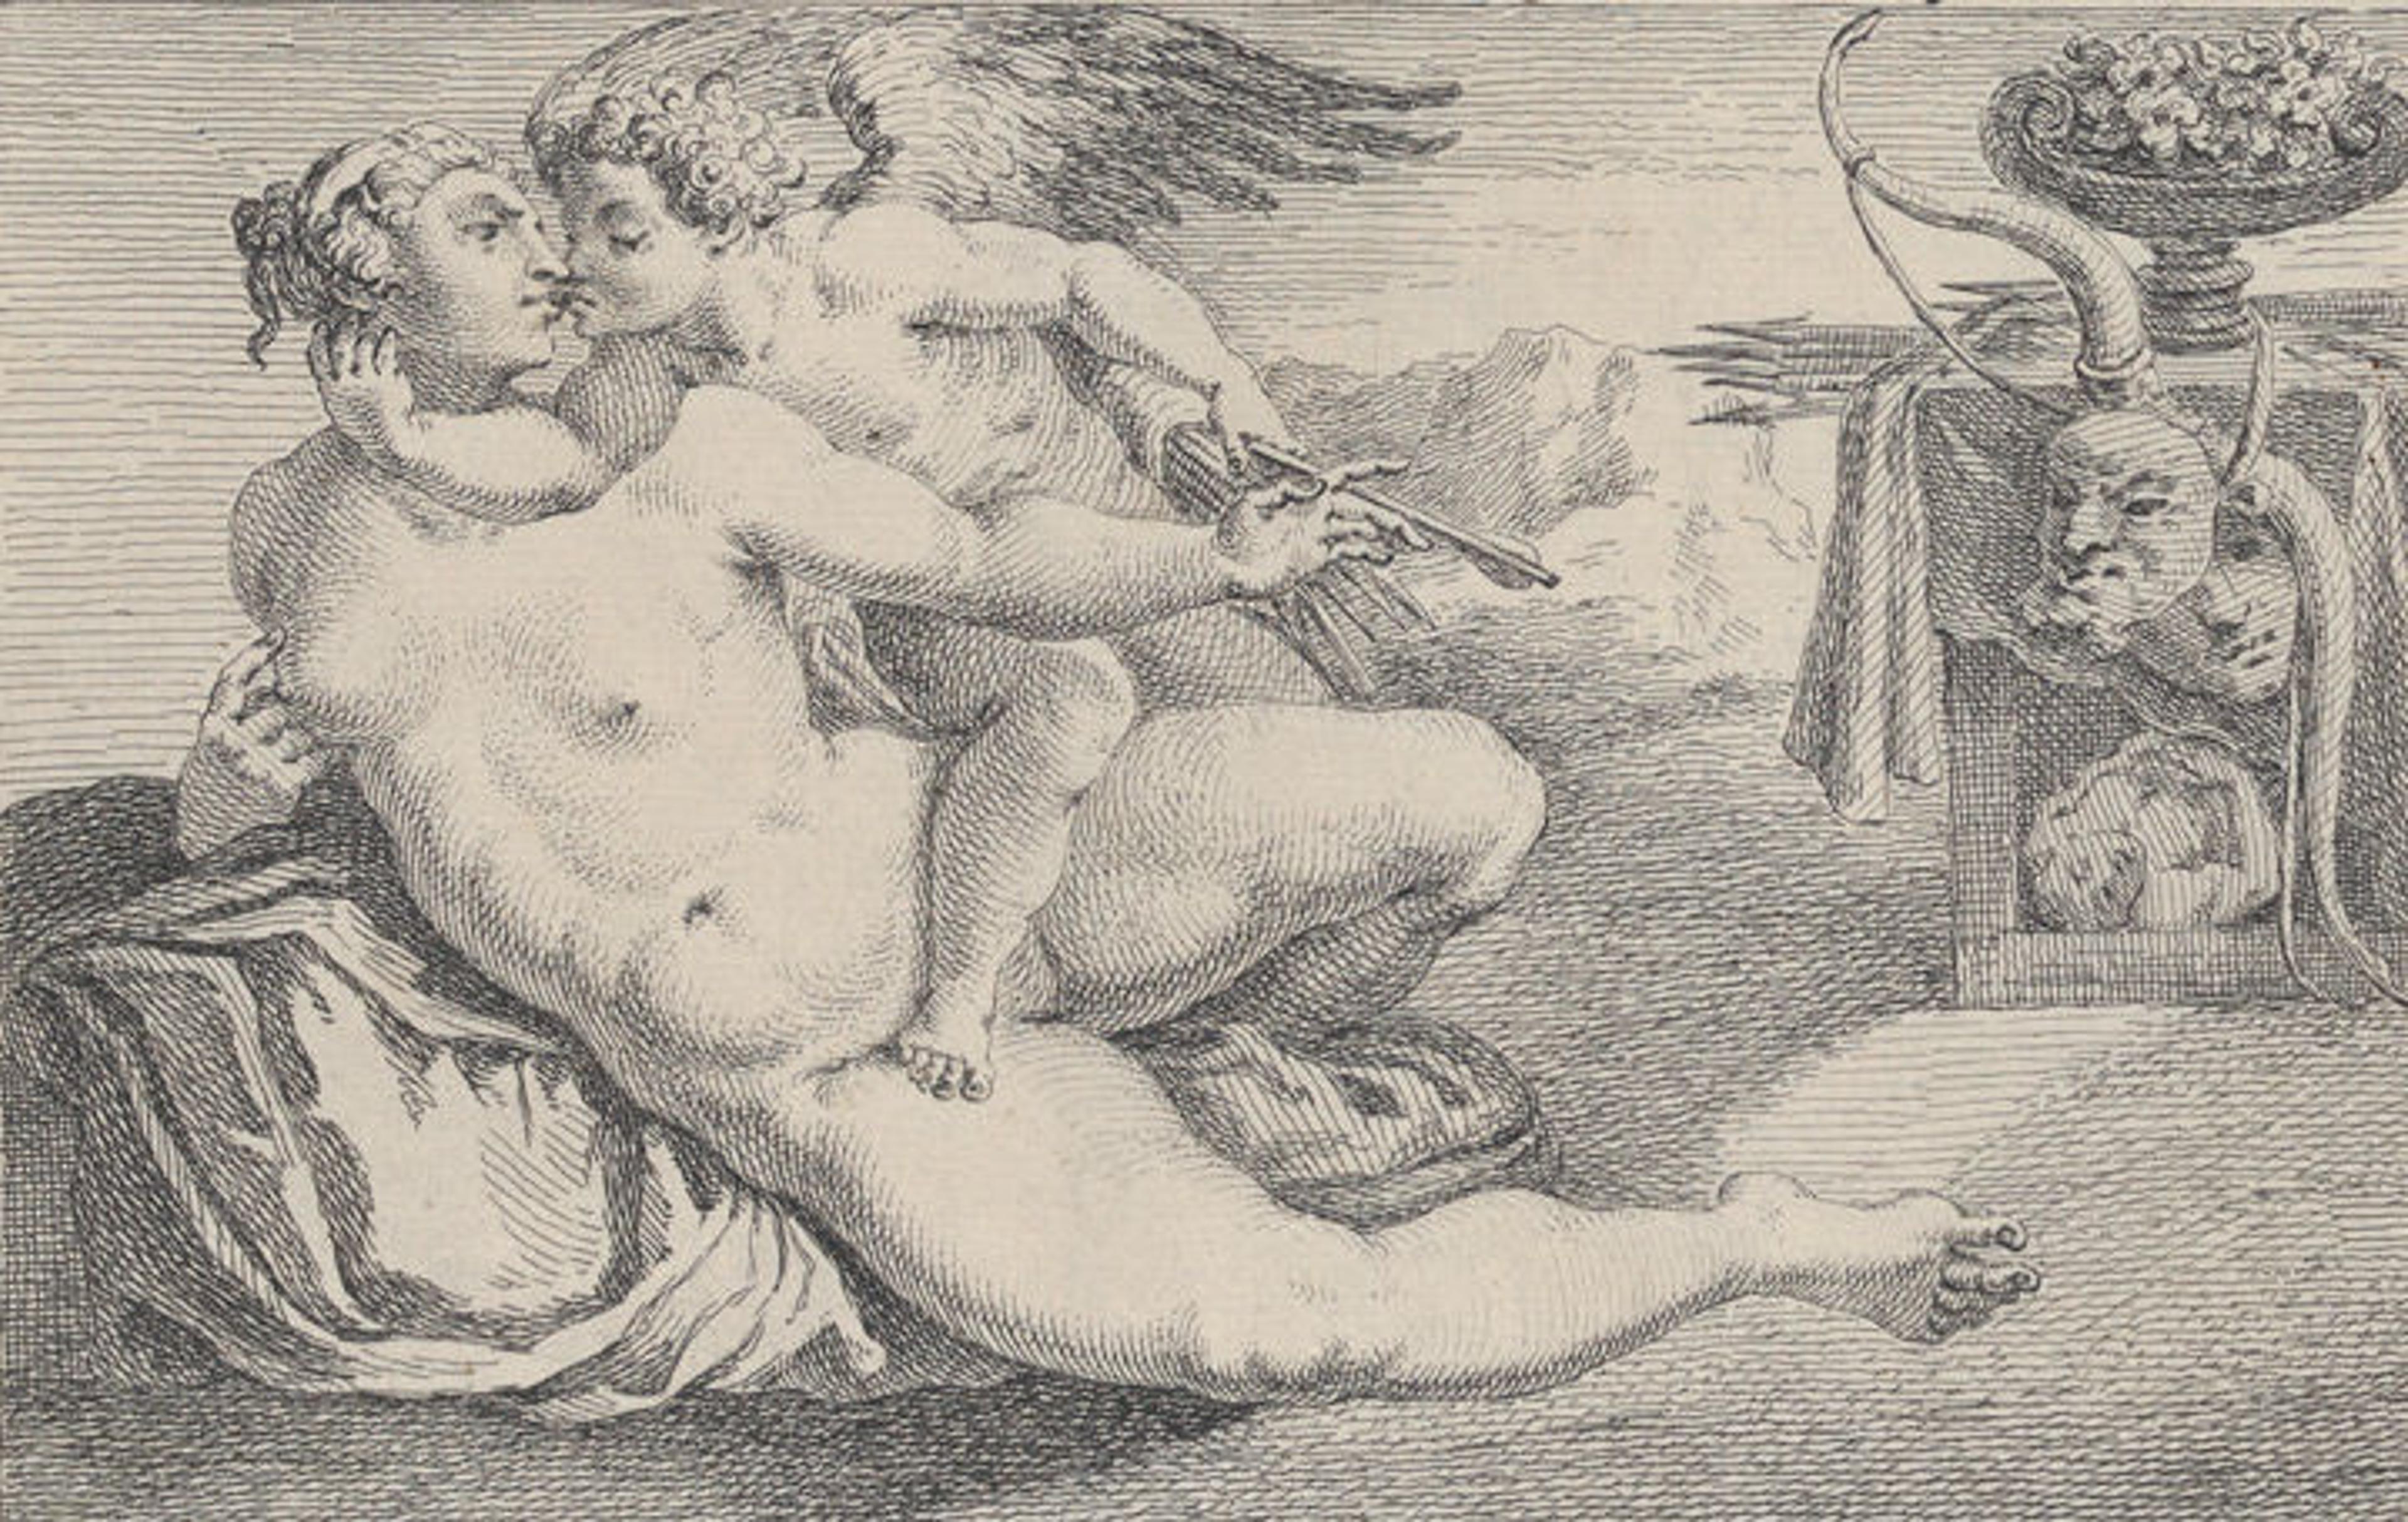 Detail view of a 1735 raffle ticket for a work drawn by Michelangelo showing a printed reproduction of the work